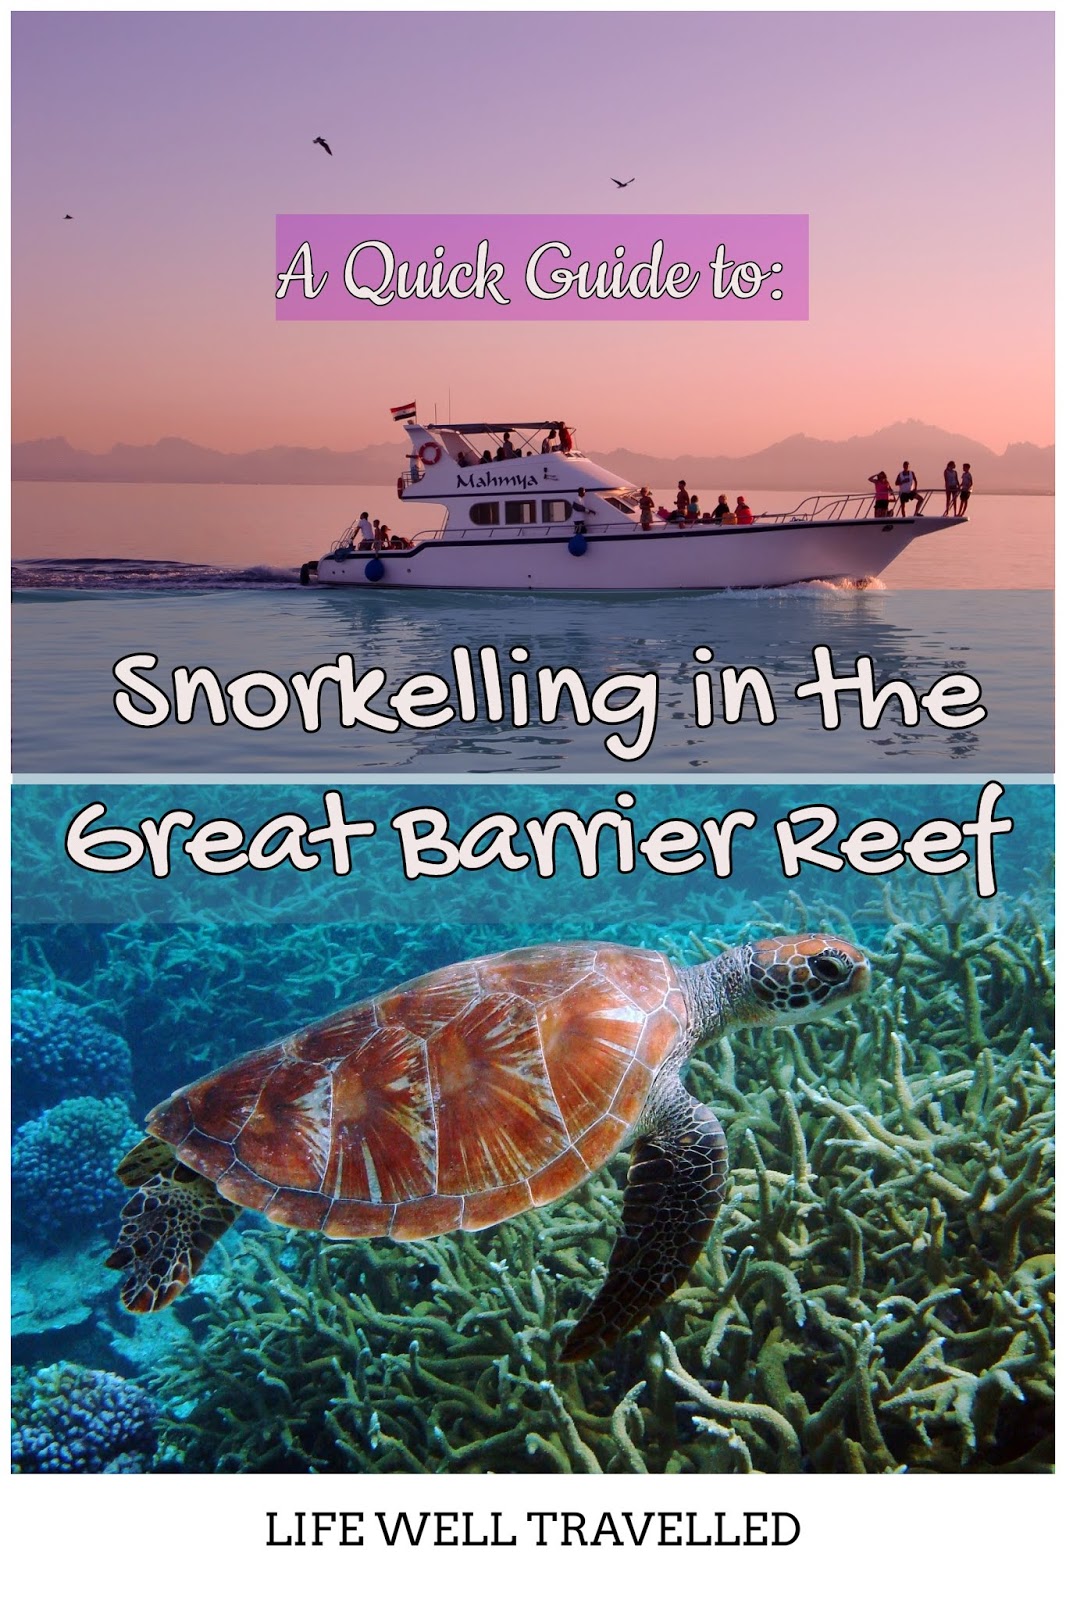 A Quick Guide to the Great Barrier Reef